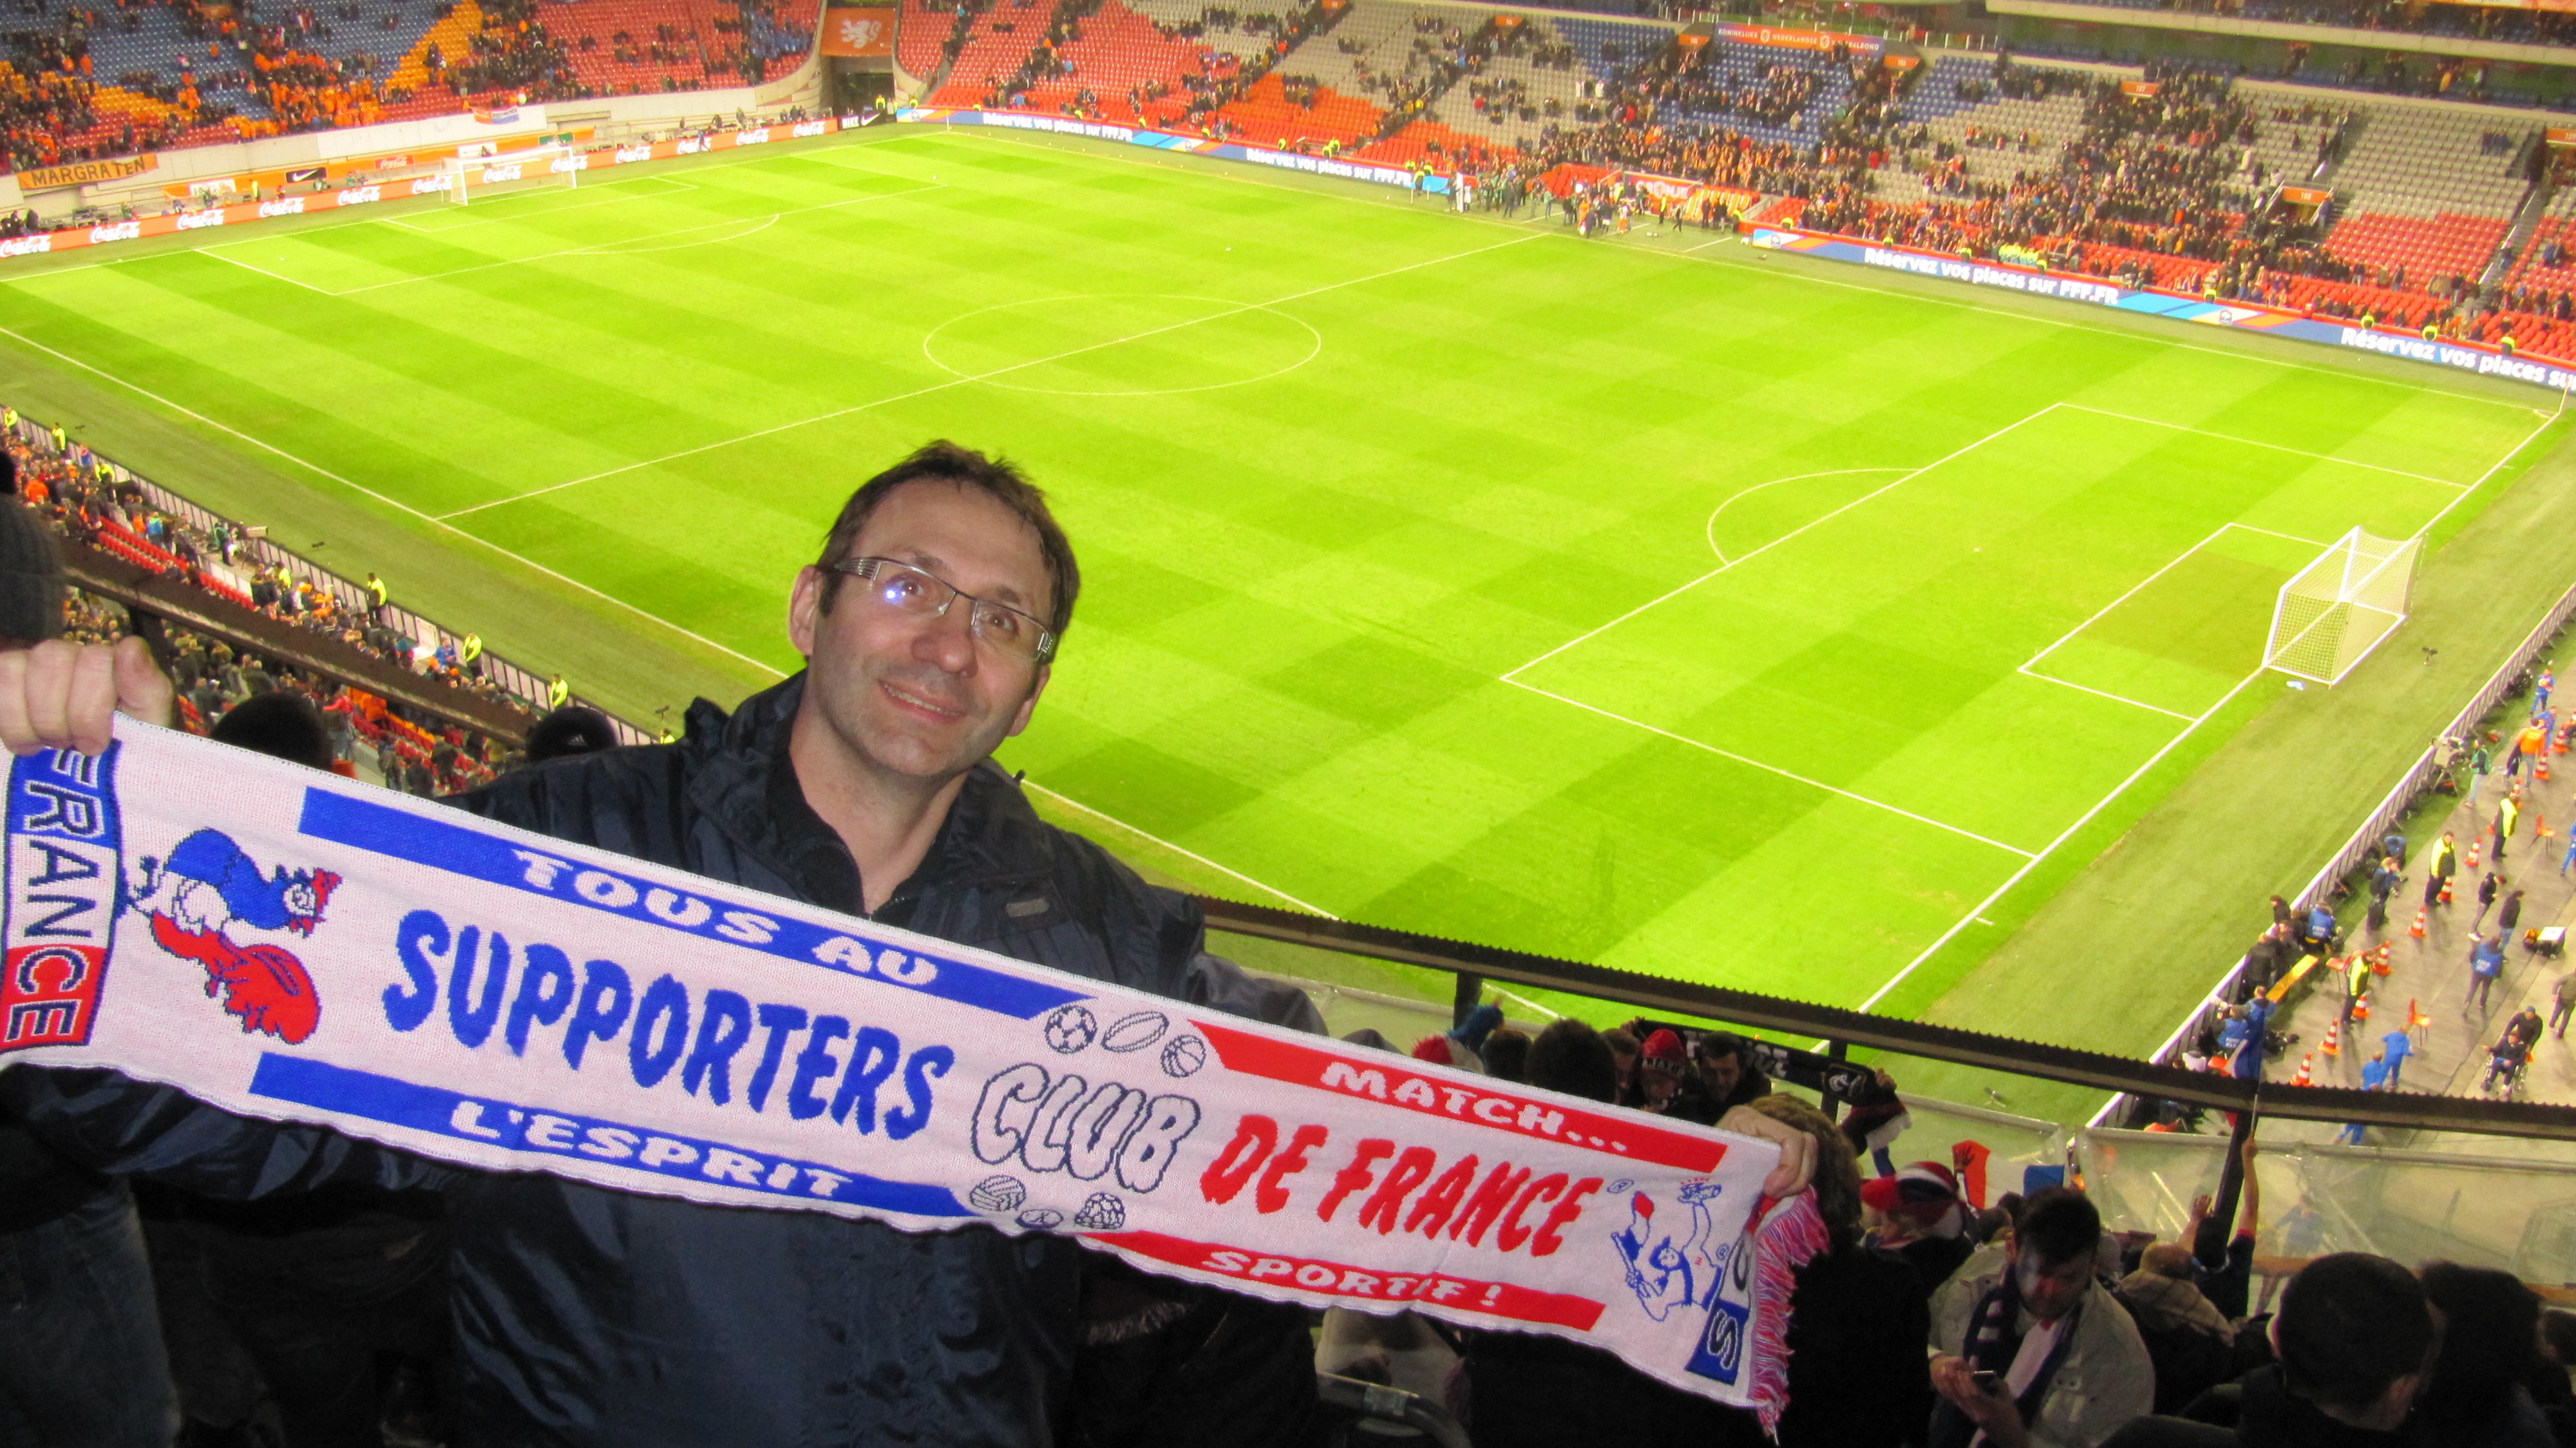 Sylvain-Quirot-club-supporter-france